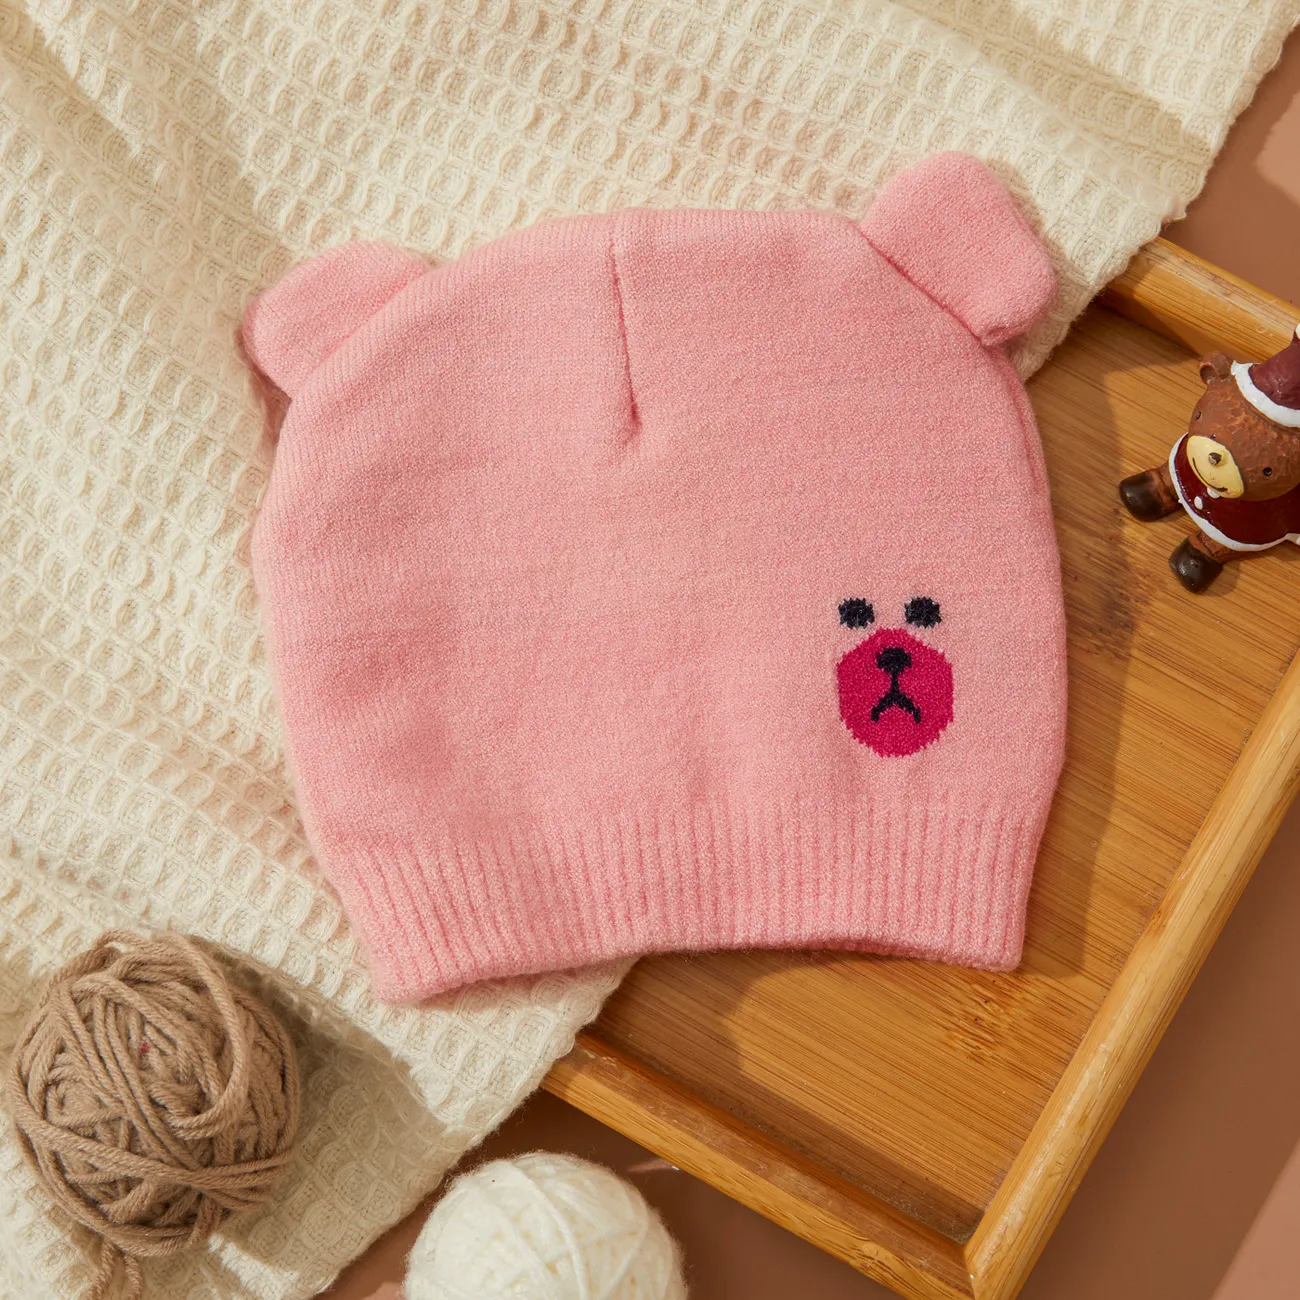 Baby Bear Design Knitted Beanie Hat Pink big image 1